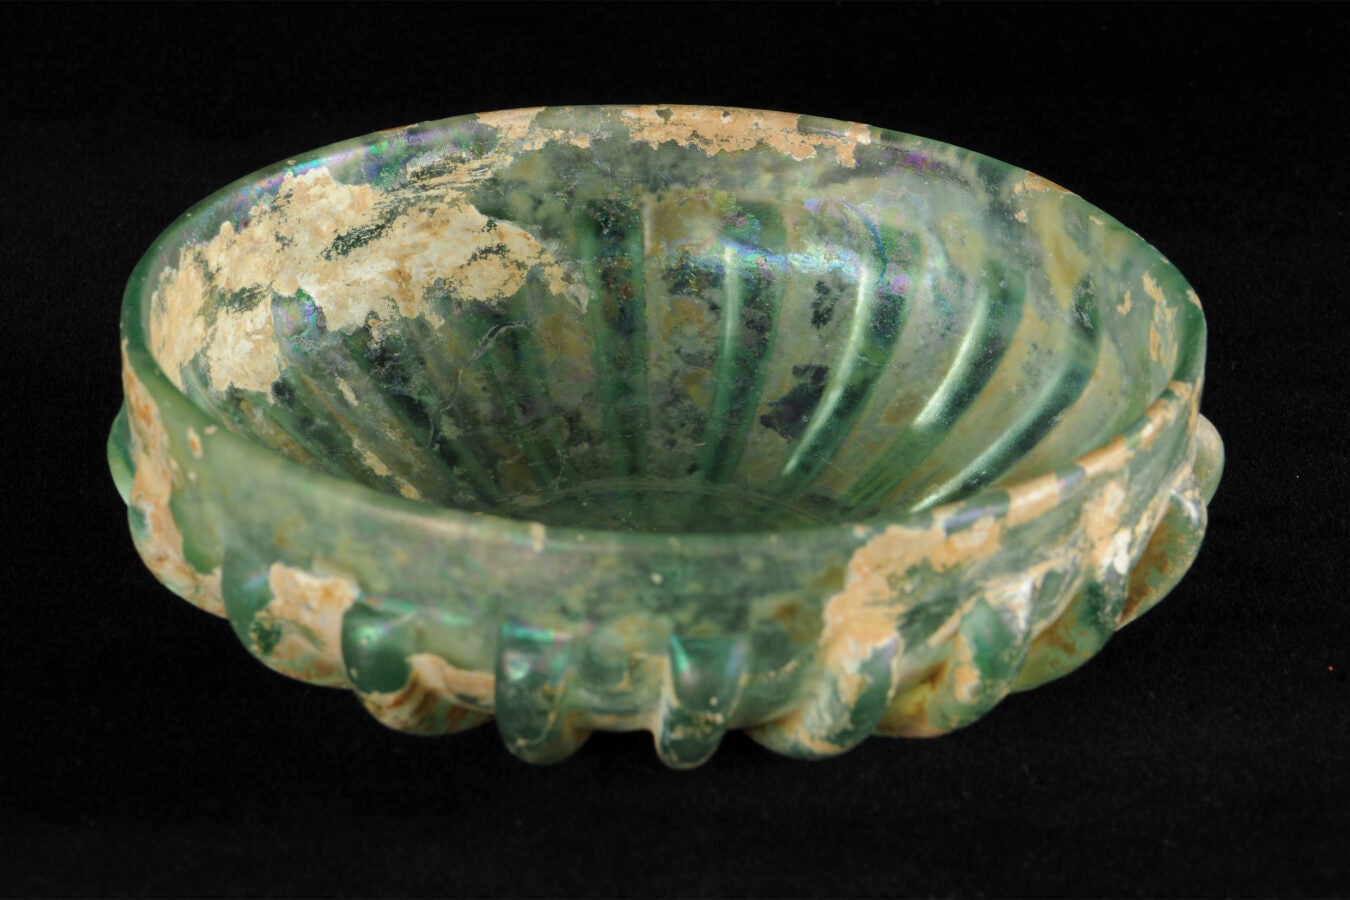 A bowl from the Mediterranean Marketplaces.